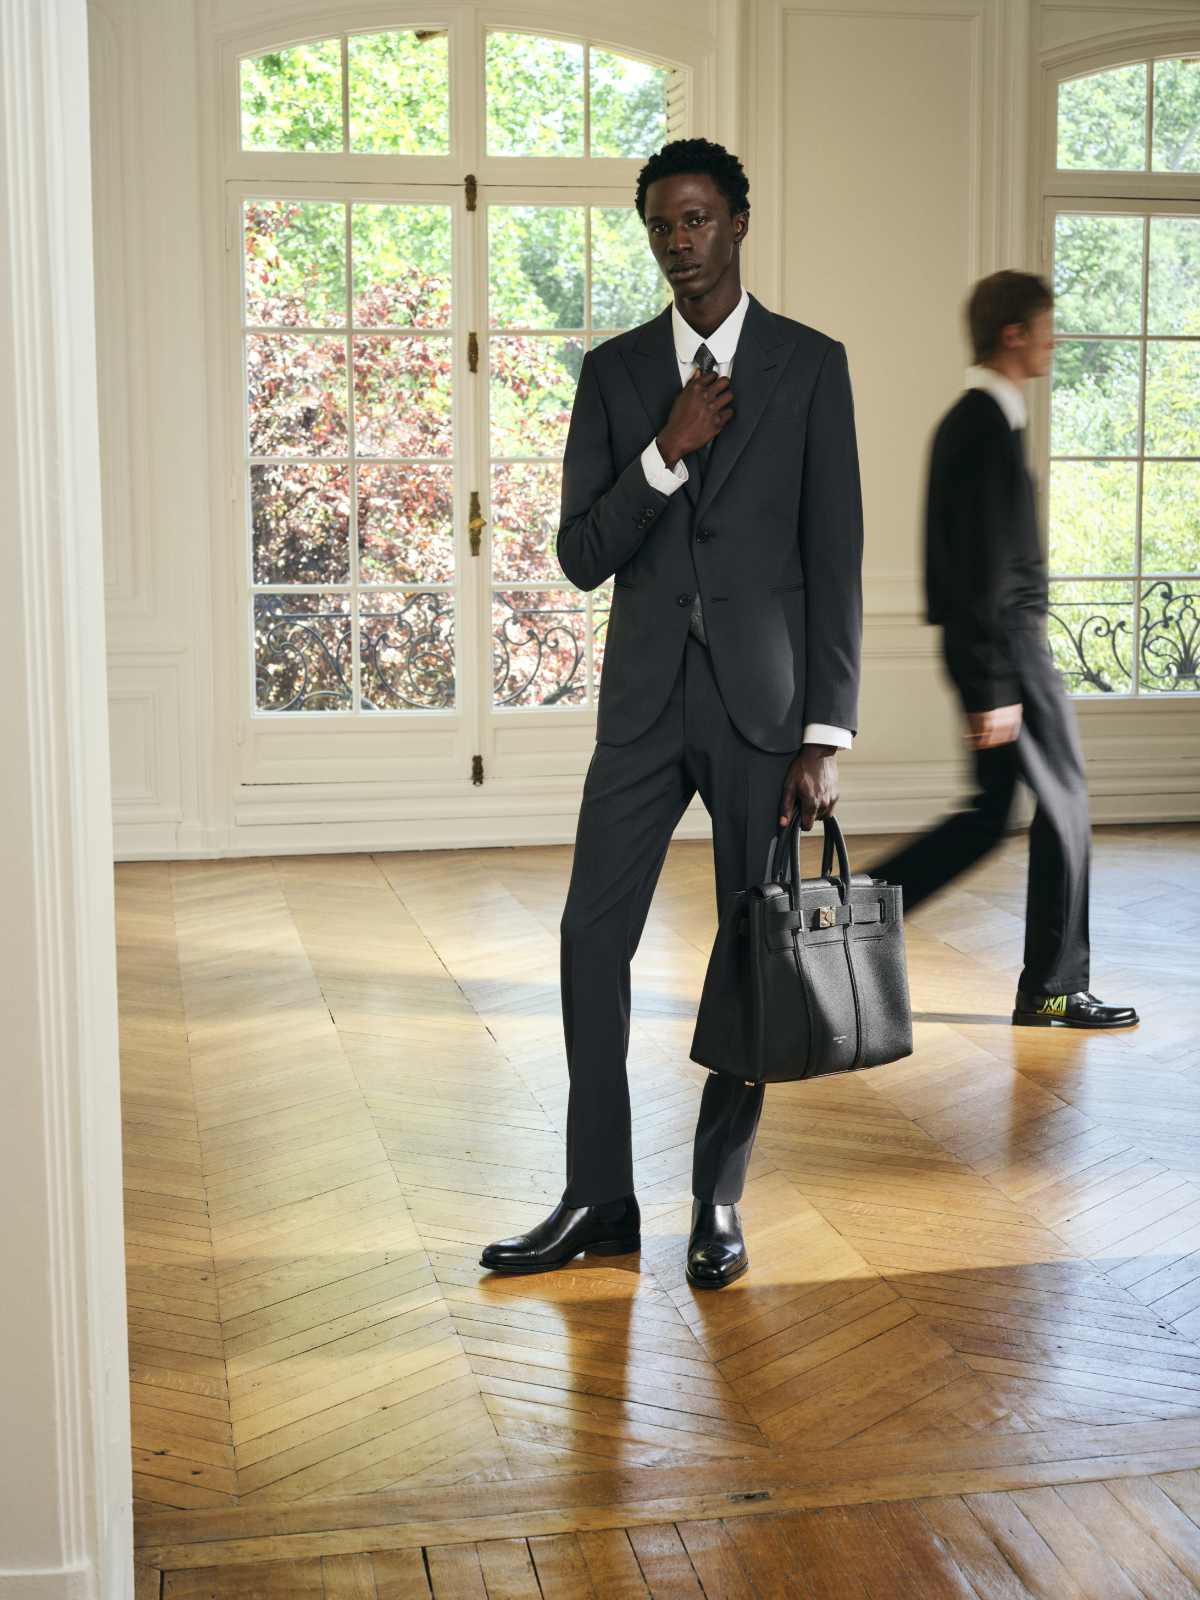 Louis Vuitton Introduces The Second Act Of Its “New Formal” Menswear Collection